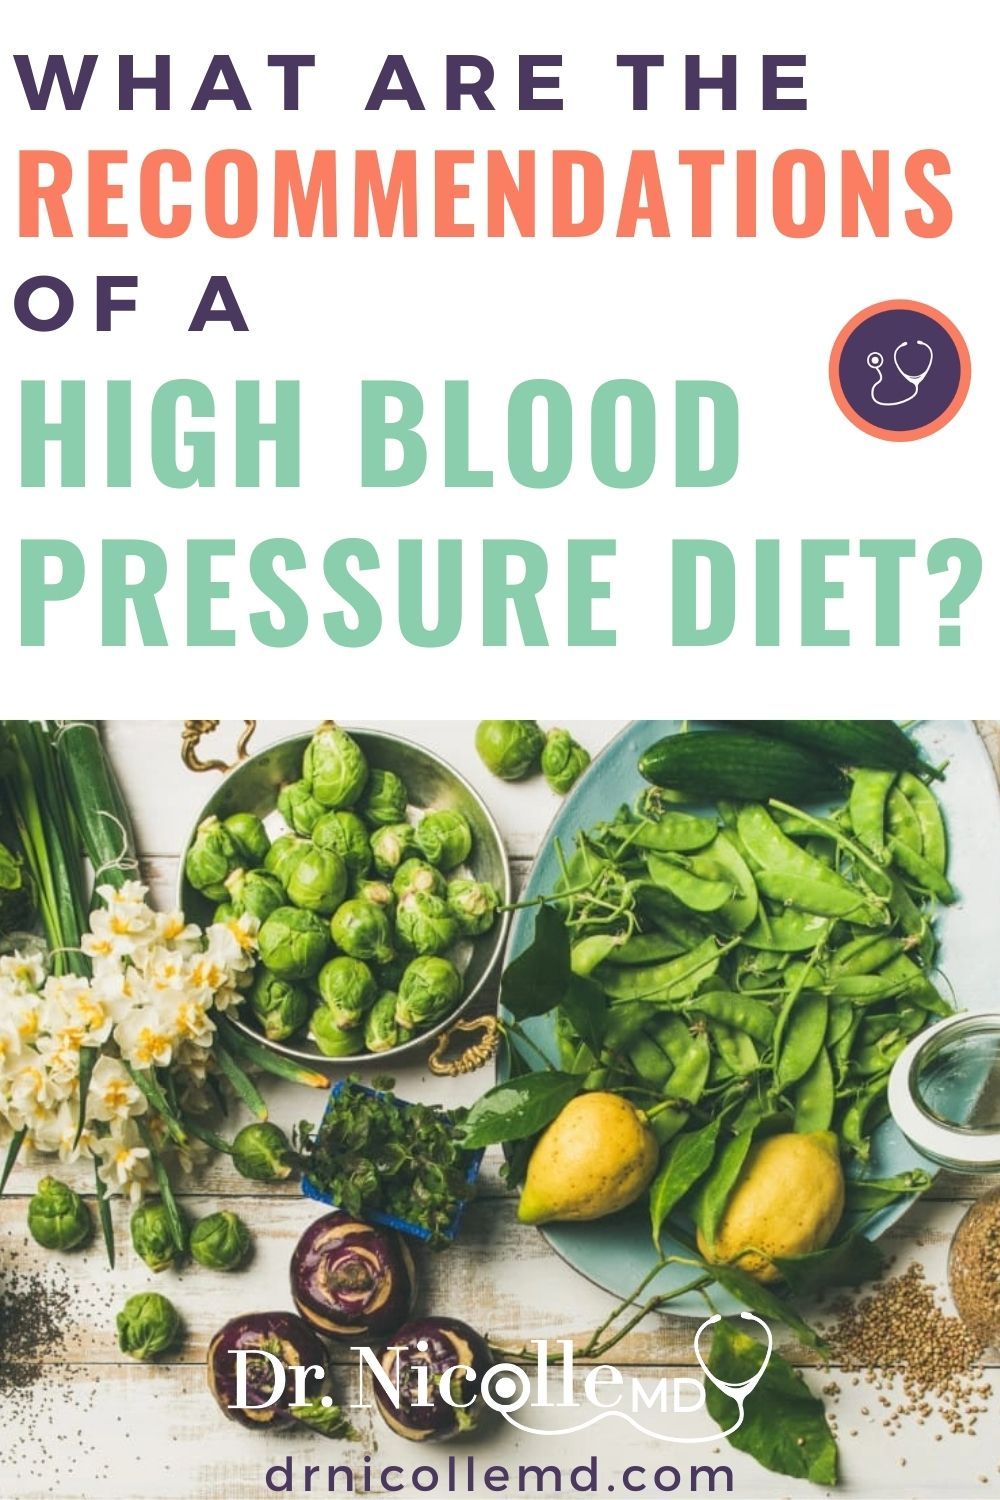 What Are The Recommendations Of A High Blood Pressure Diet?